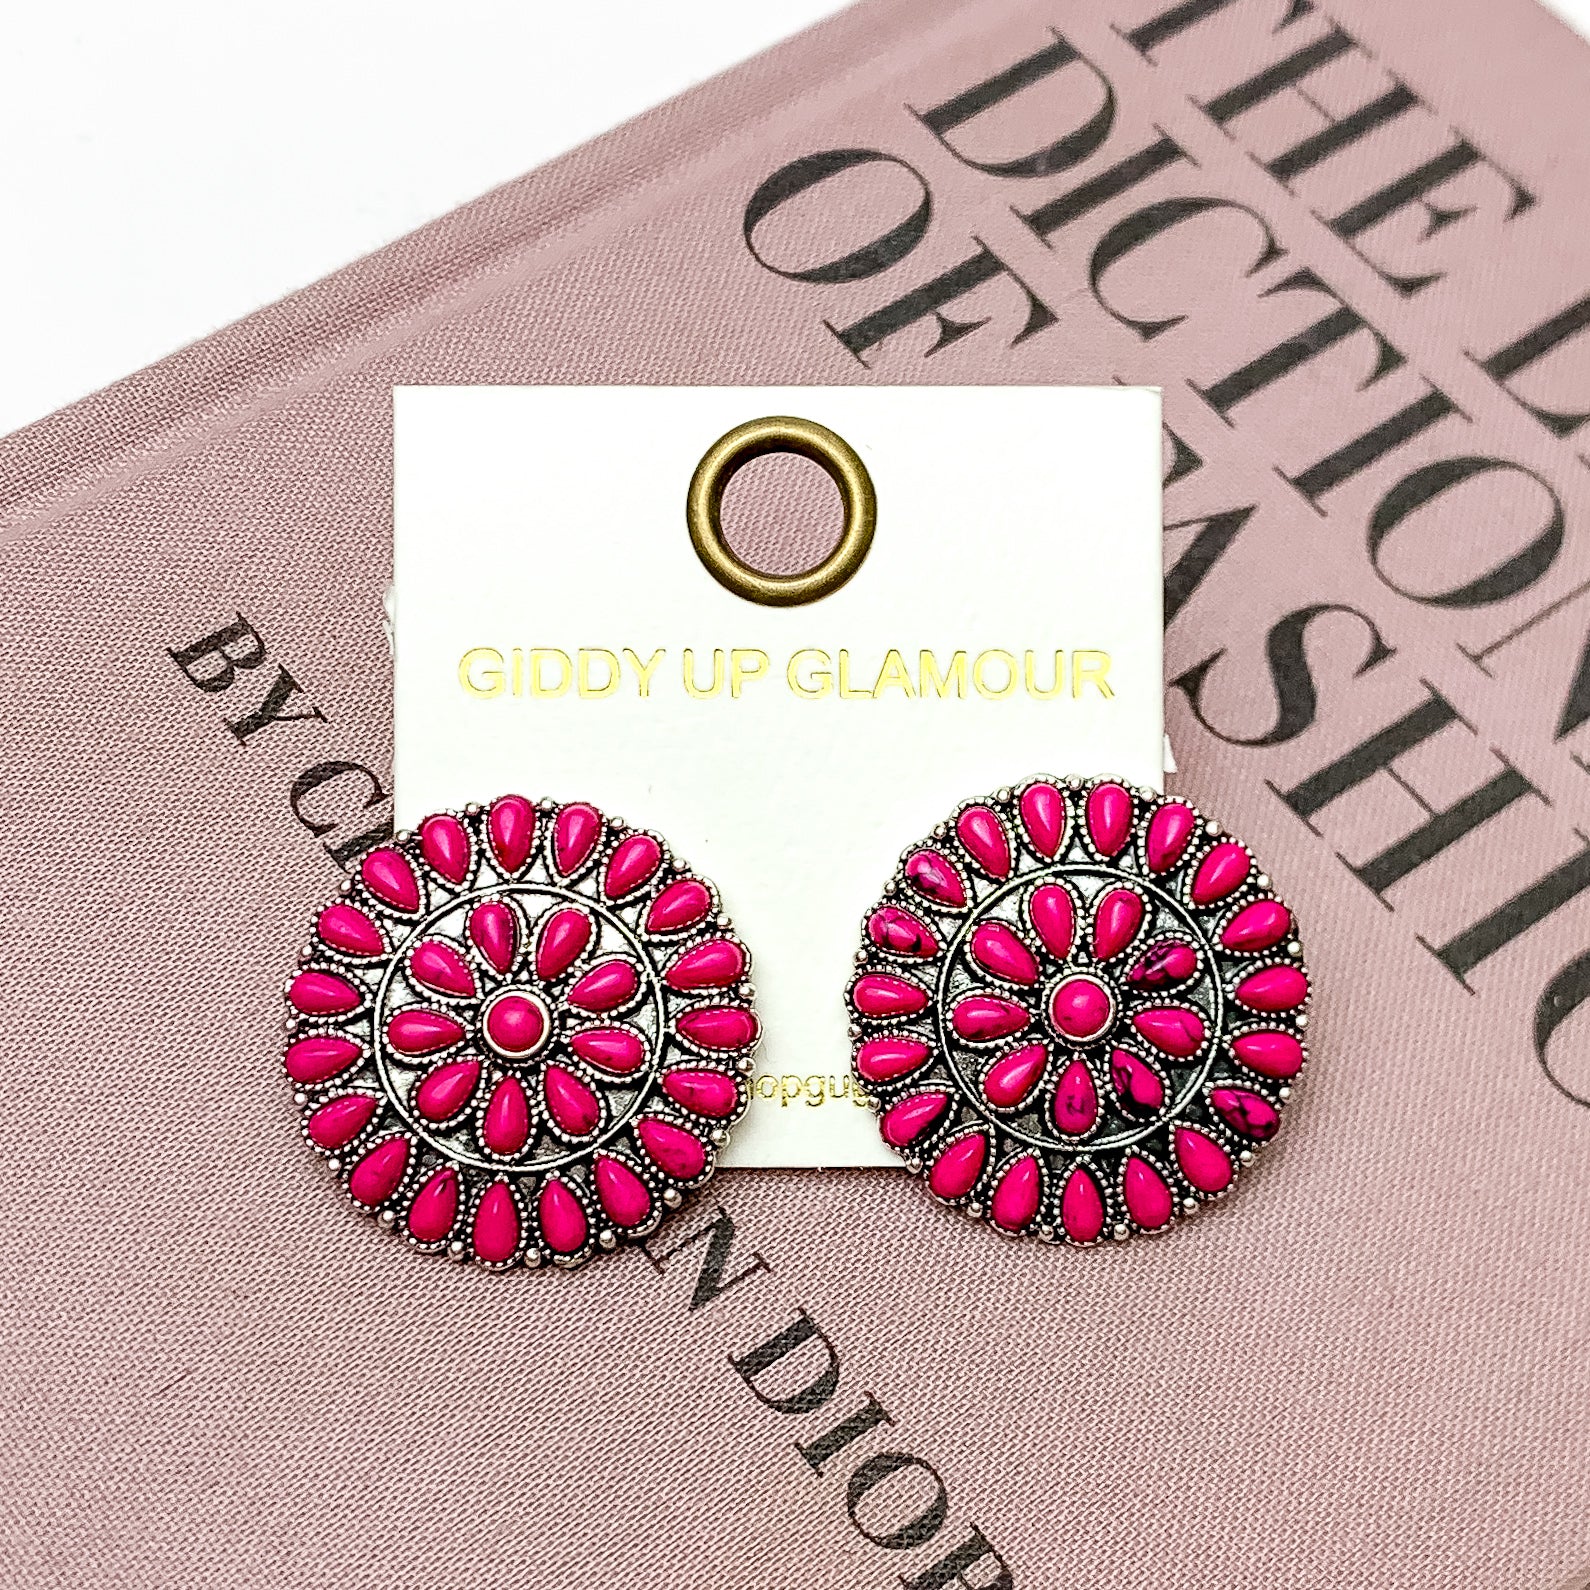 Silver Tone Circle Earrings with Fuchsia Pink Stones - Giddy Up Glamour Boutique